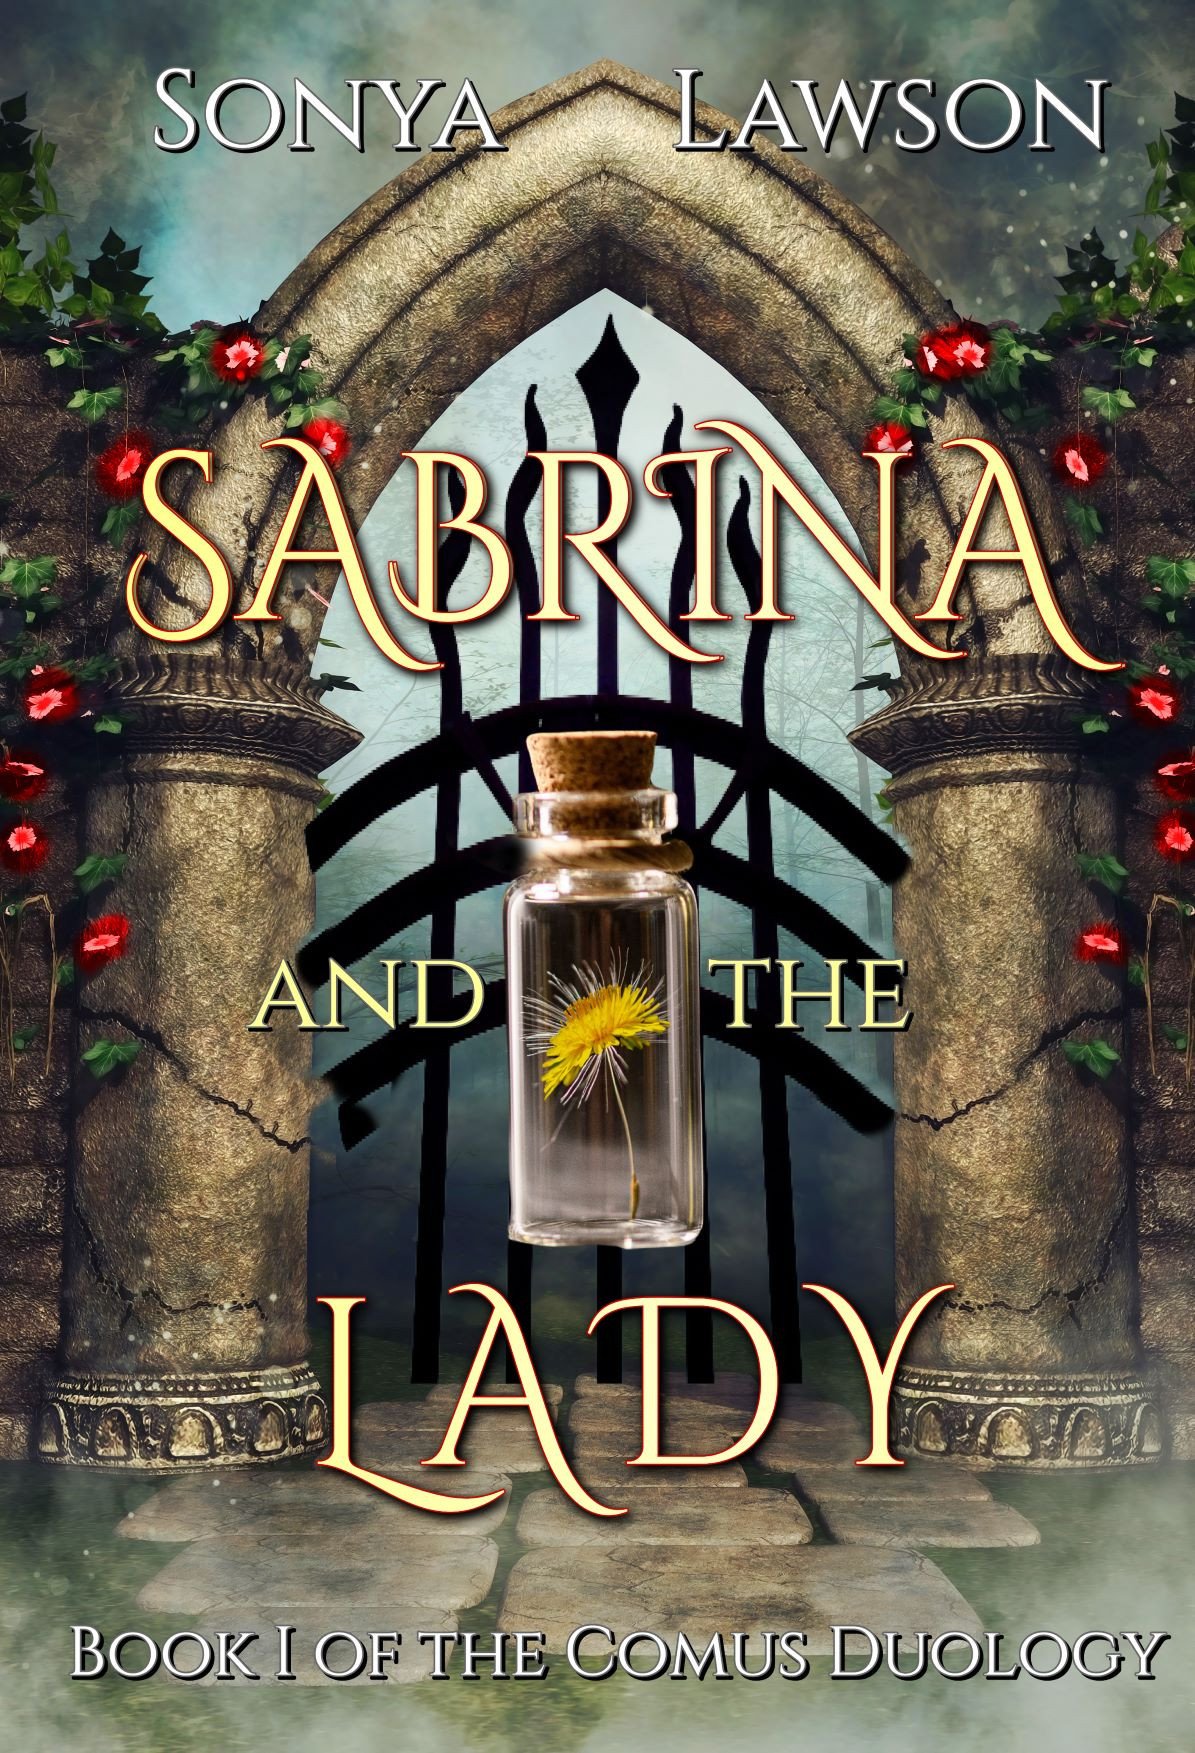 Sabrina and The Lady: Book I of The Comus Duology